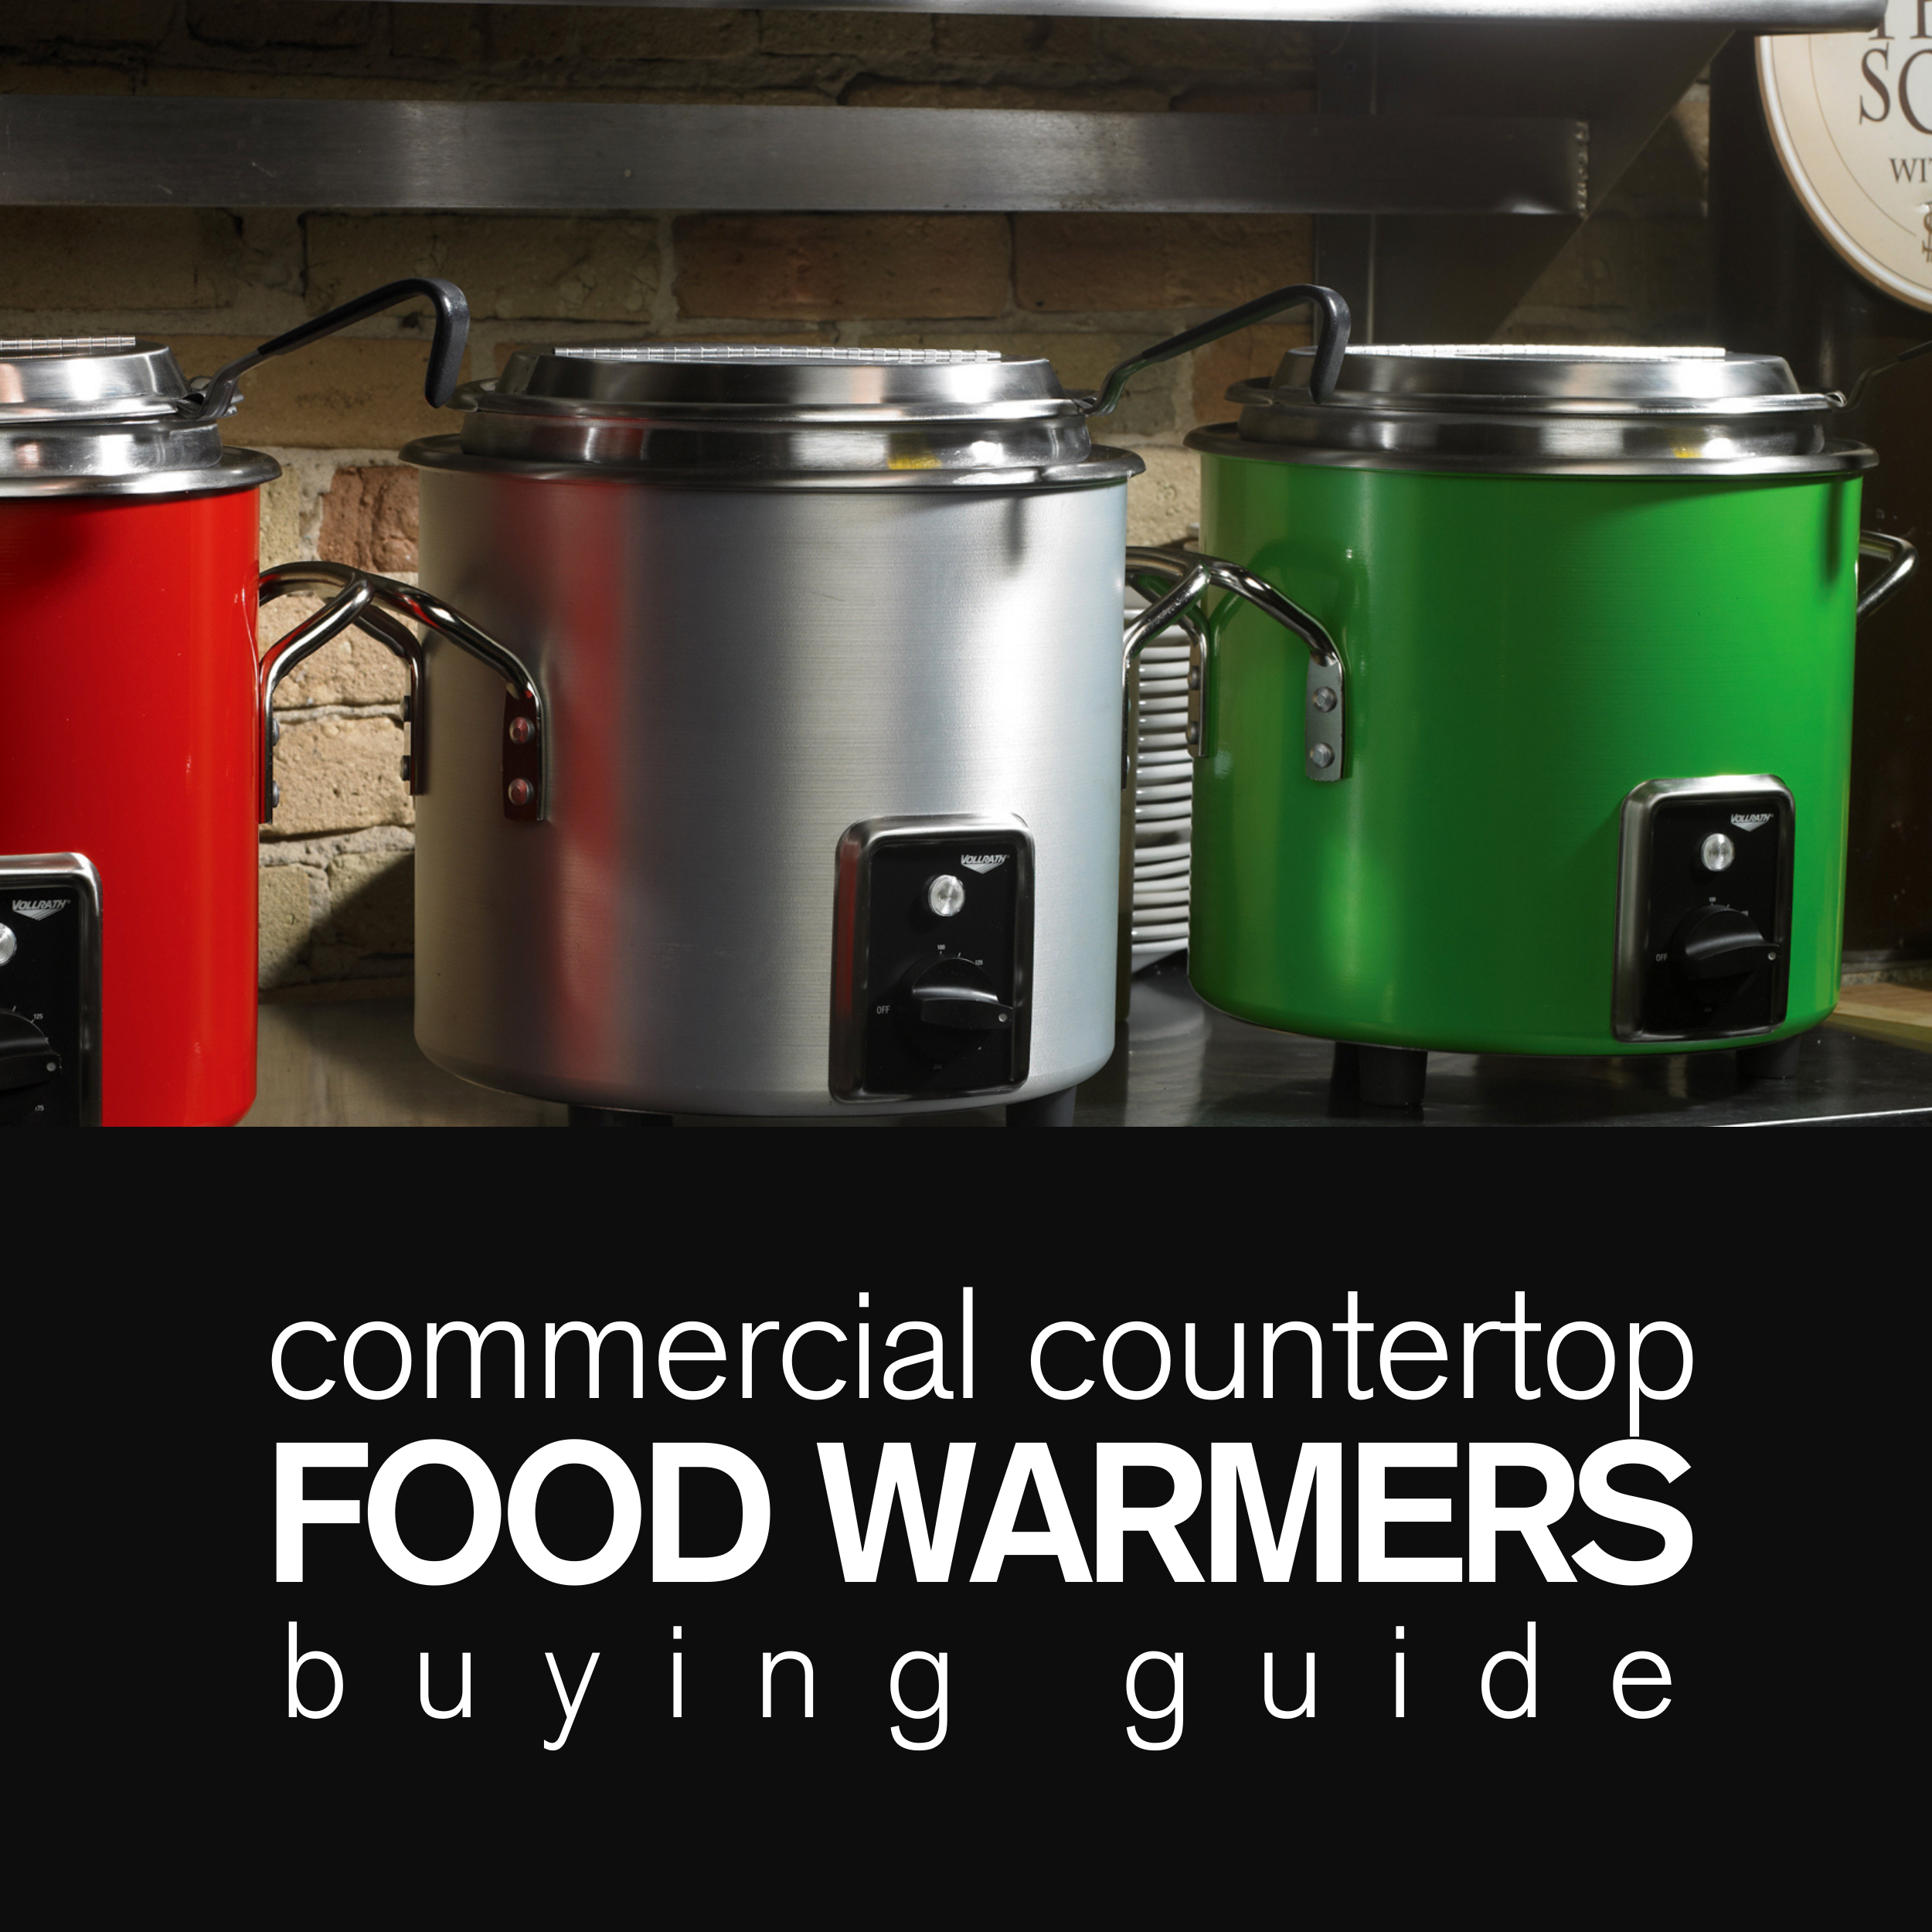 Rethermalizer vs Food Warmer: What's the Difference?